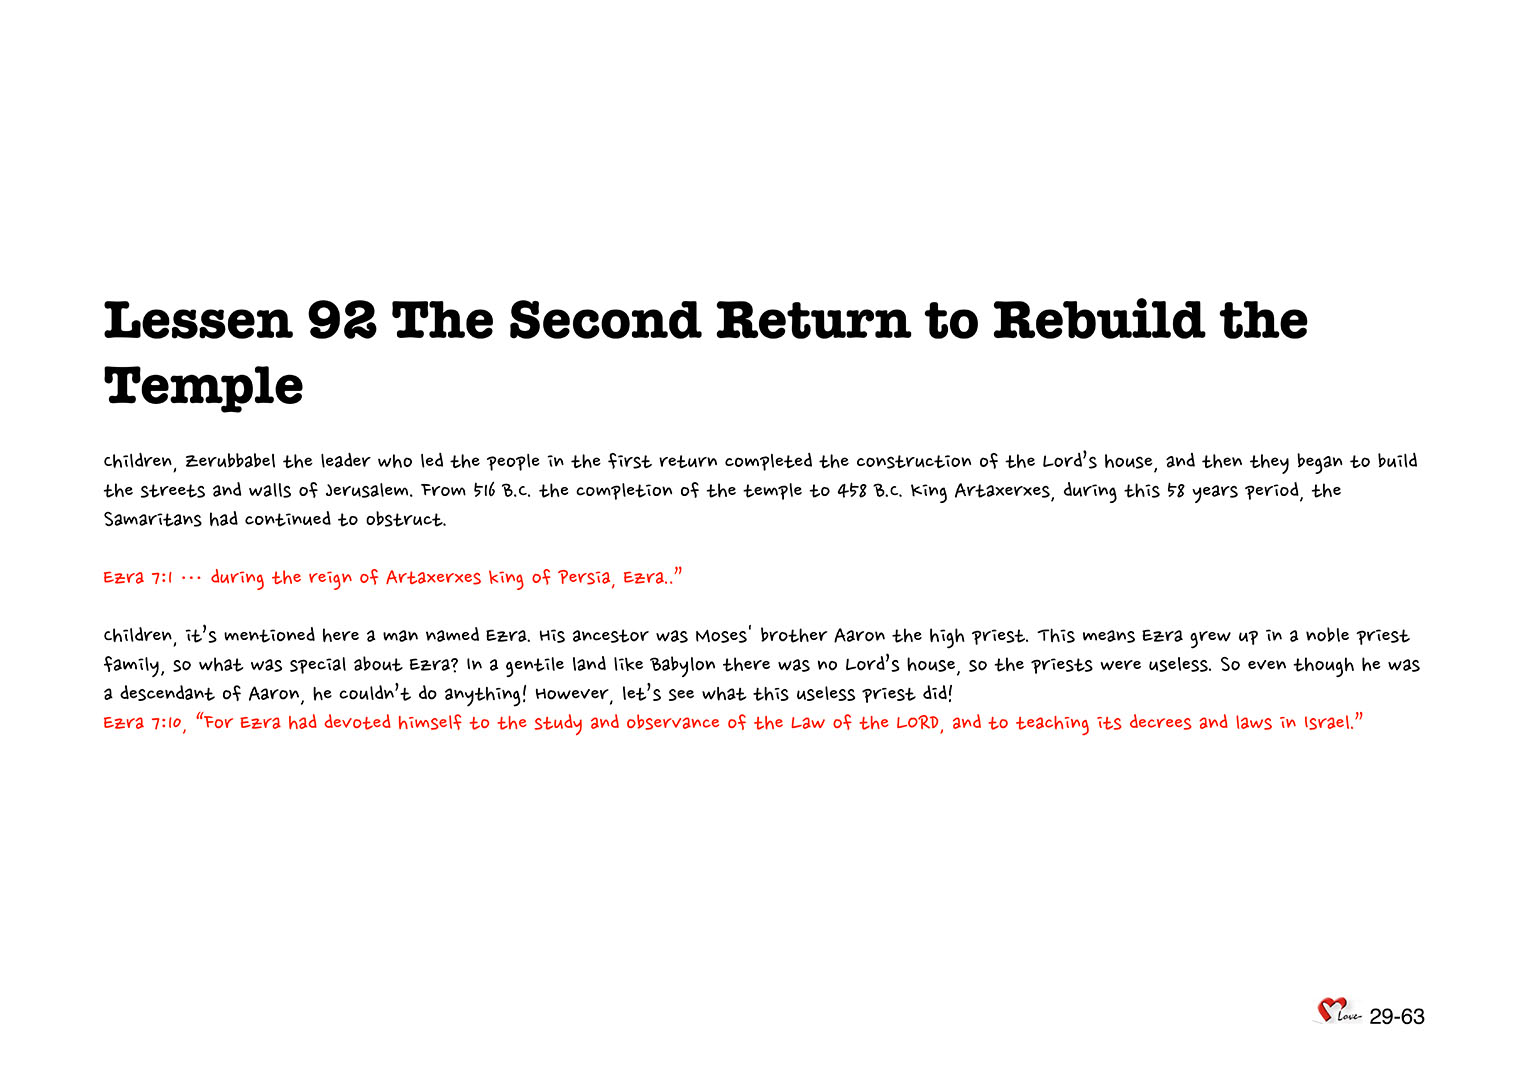 Chapter 29 - Lesson 92 - The Second Return to Rebuild the Temple